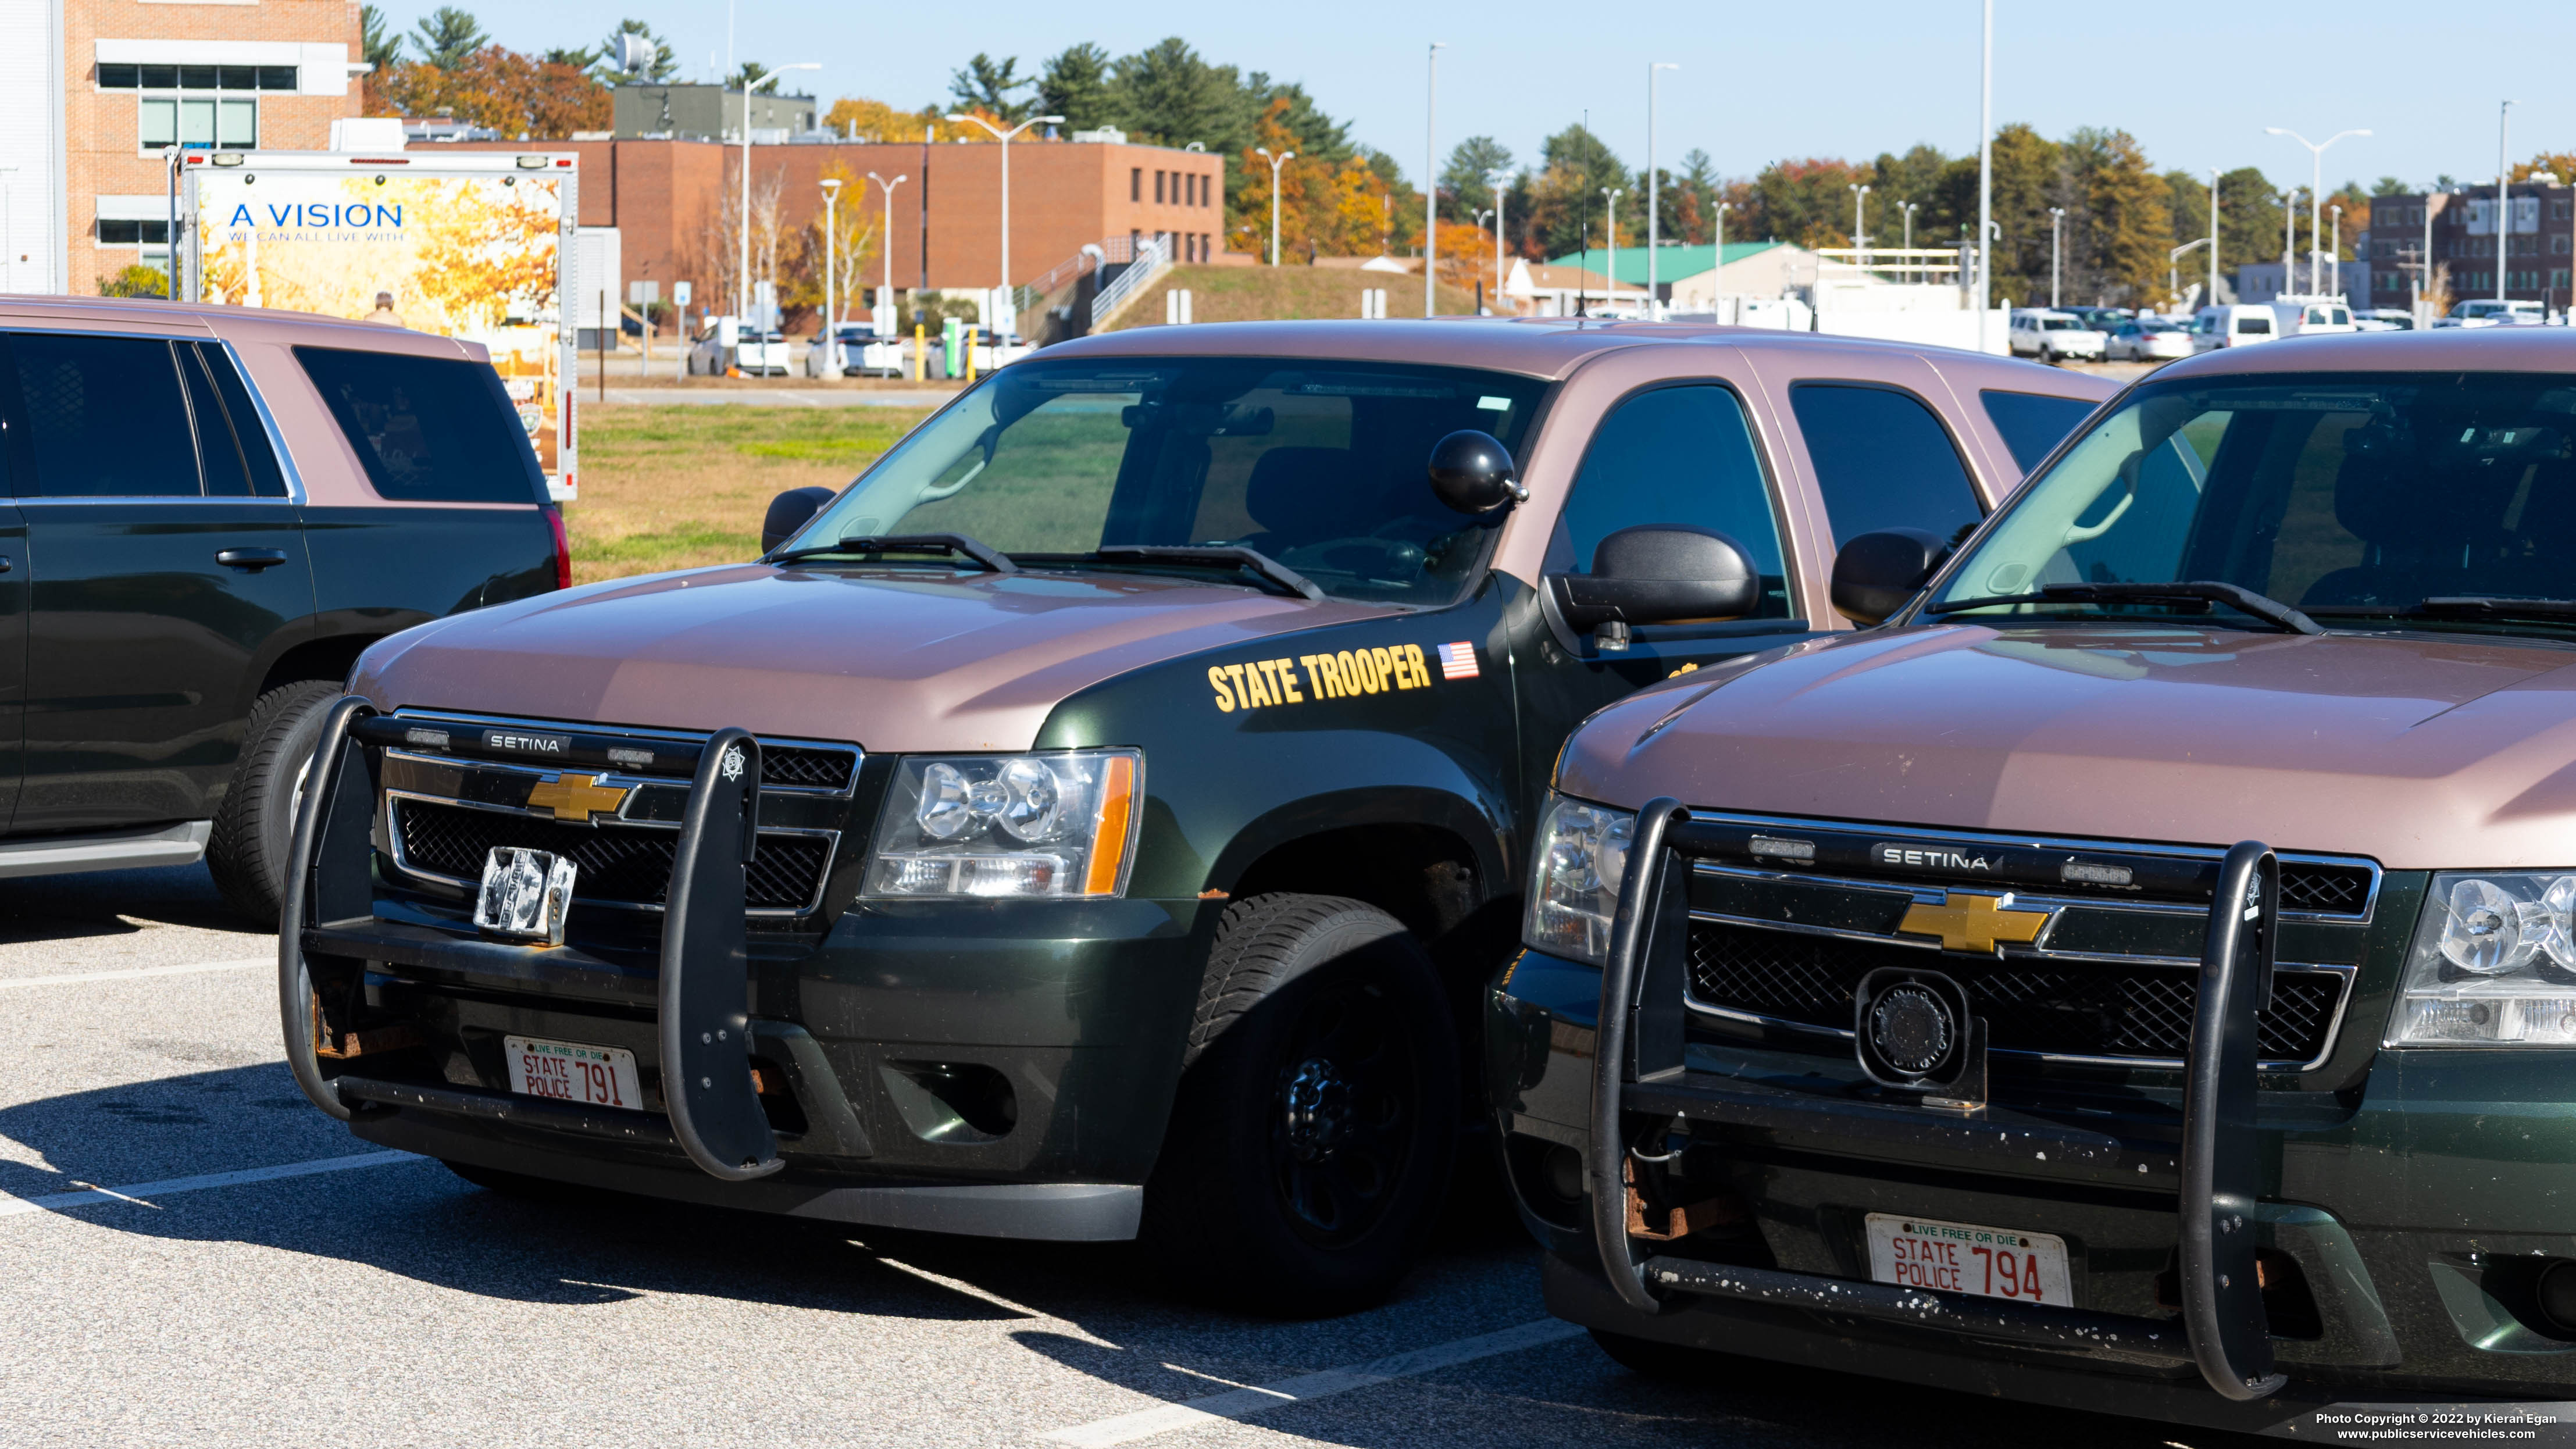 A photo  of New Hampshire State Police
            Cruiser 791, a 2007-2013 Chevrolet Tahoe             taken by Kieran Egan